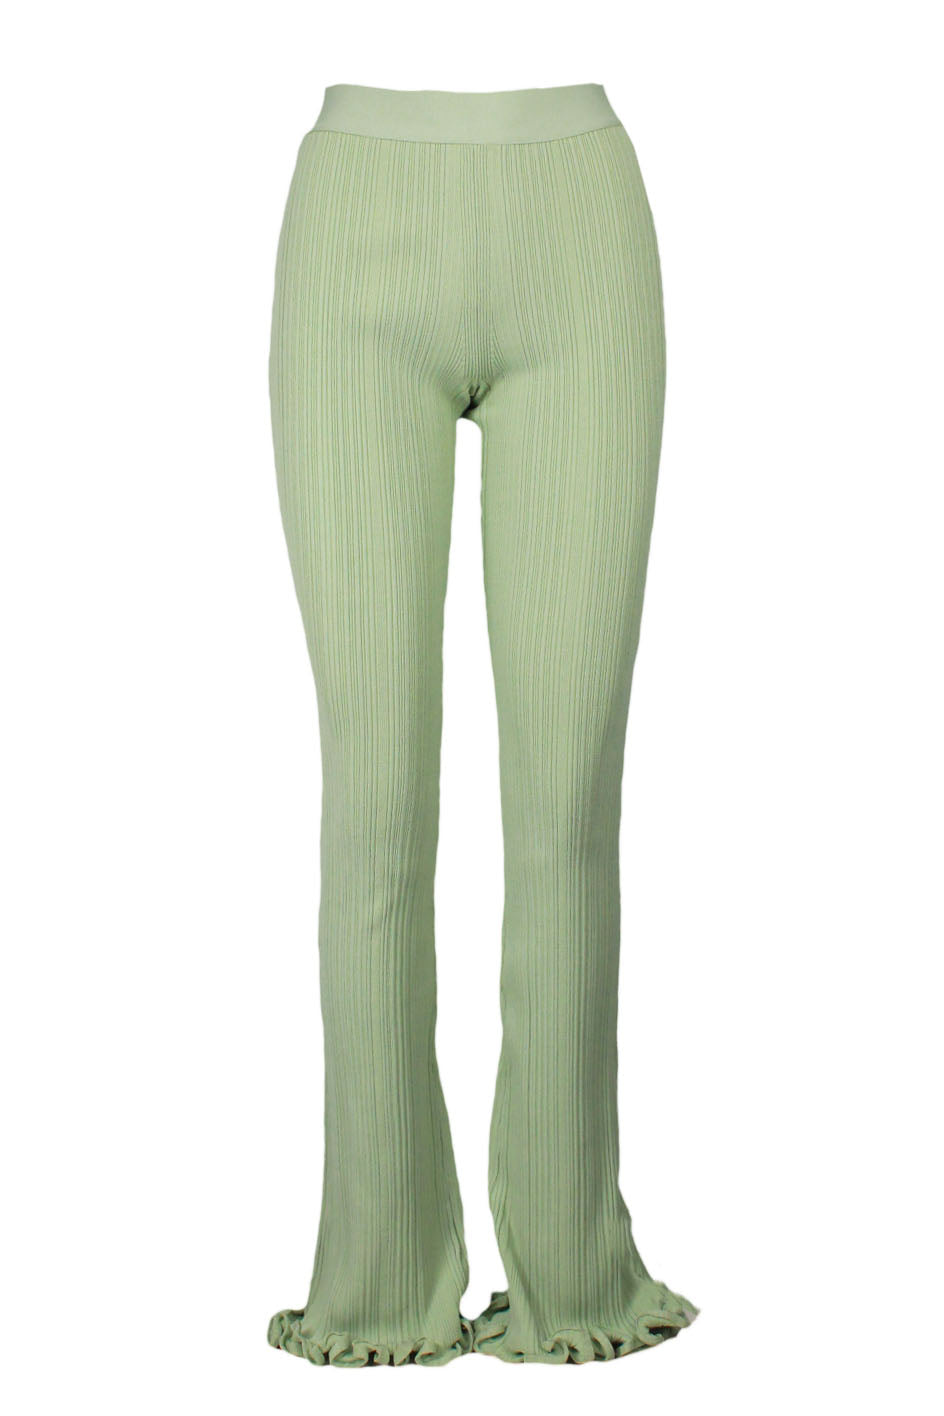 description: herve leger paris green ribbed pants. feature high waisted silhouette, flare leg style, lettuce bottom hem, and zipper closure at center back. 